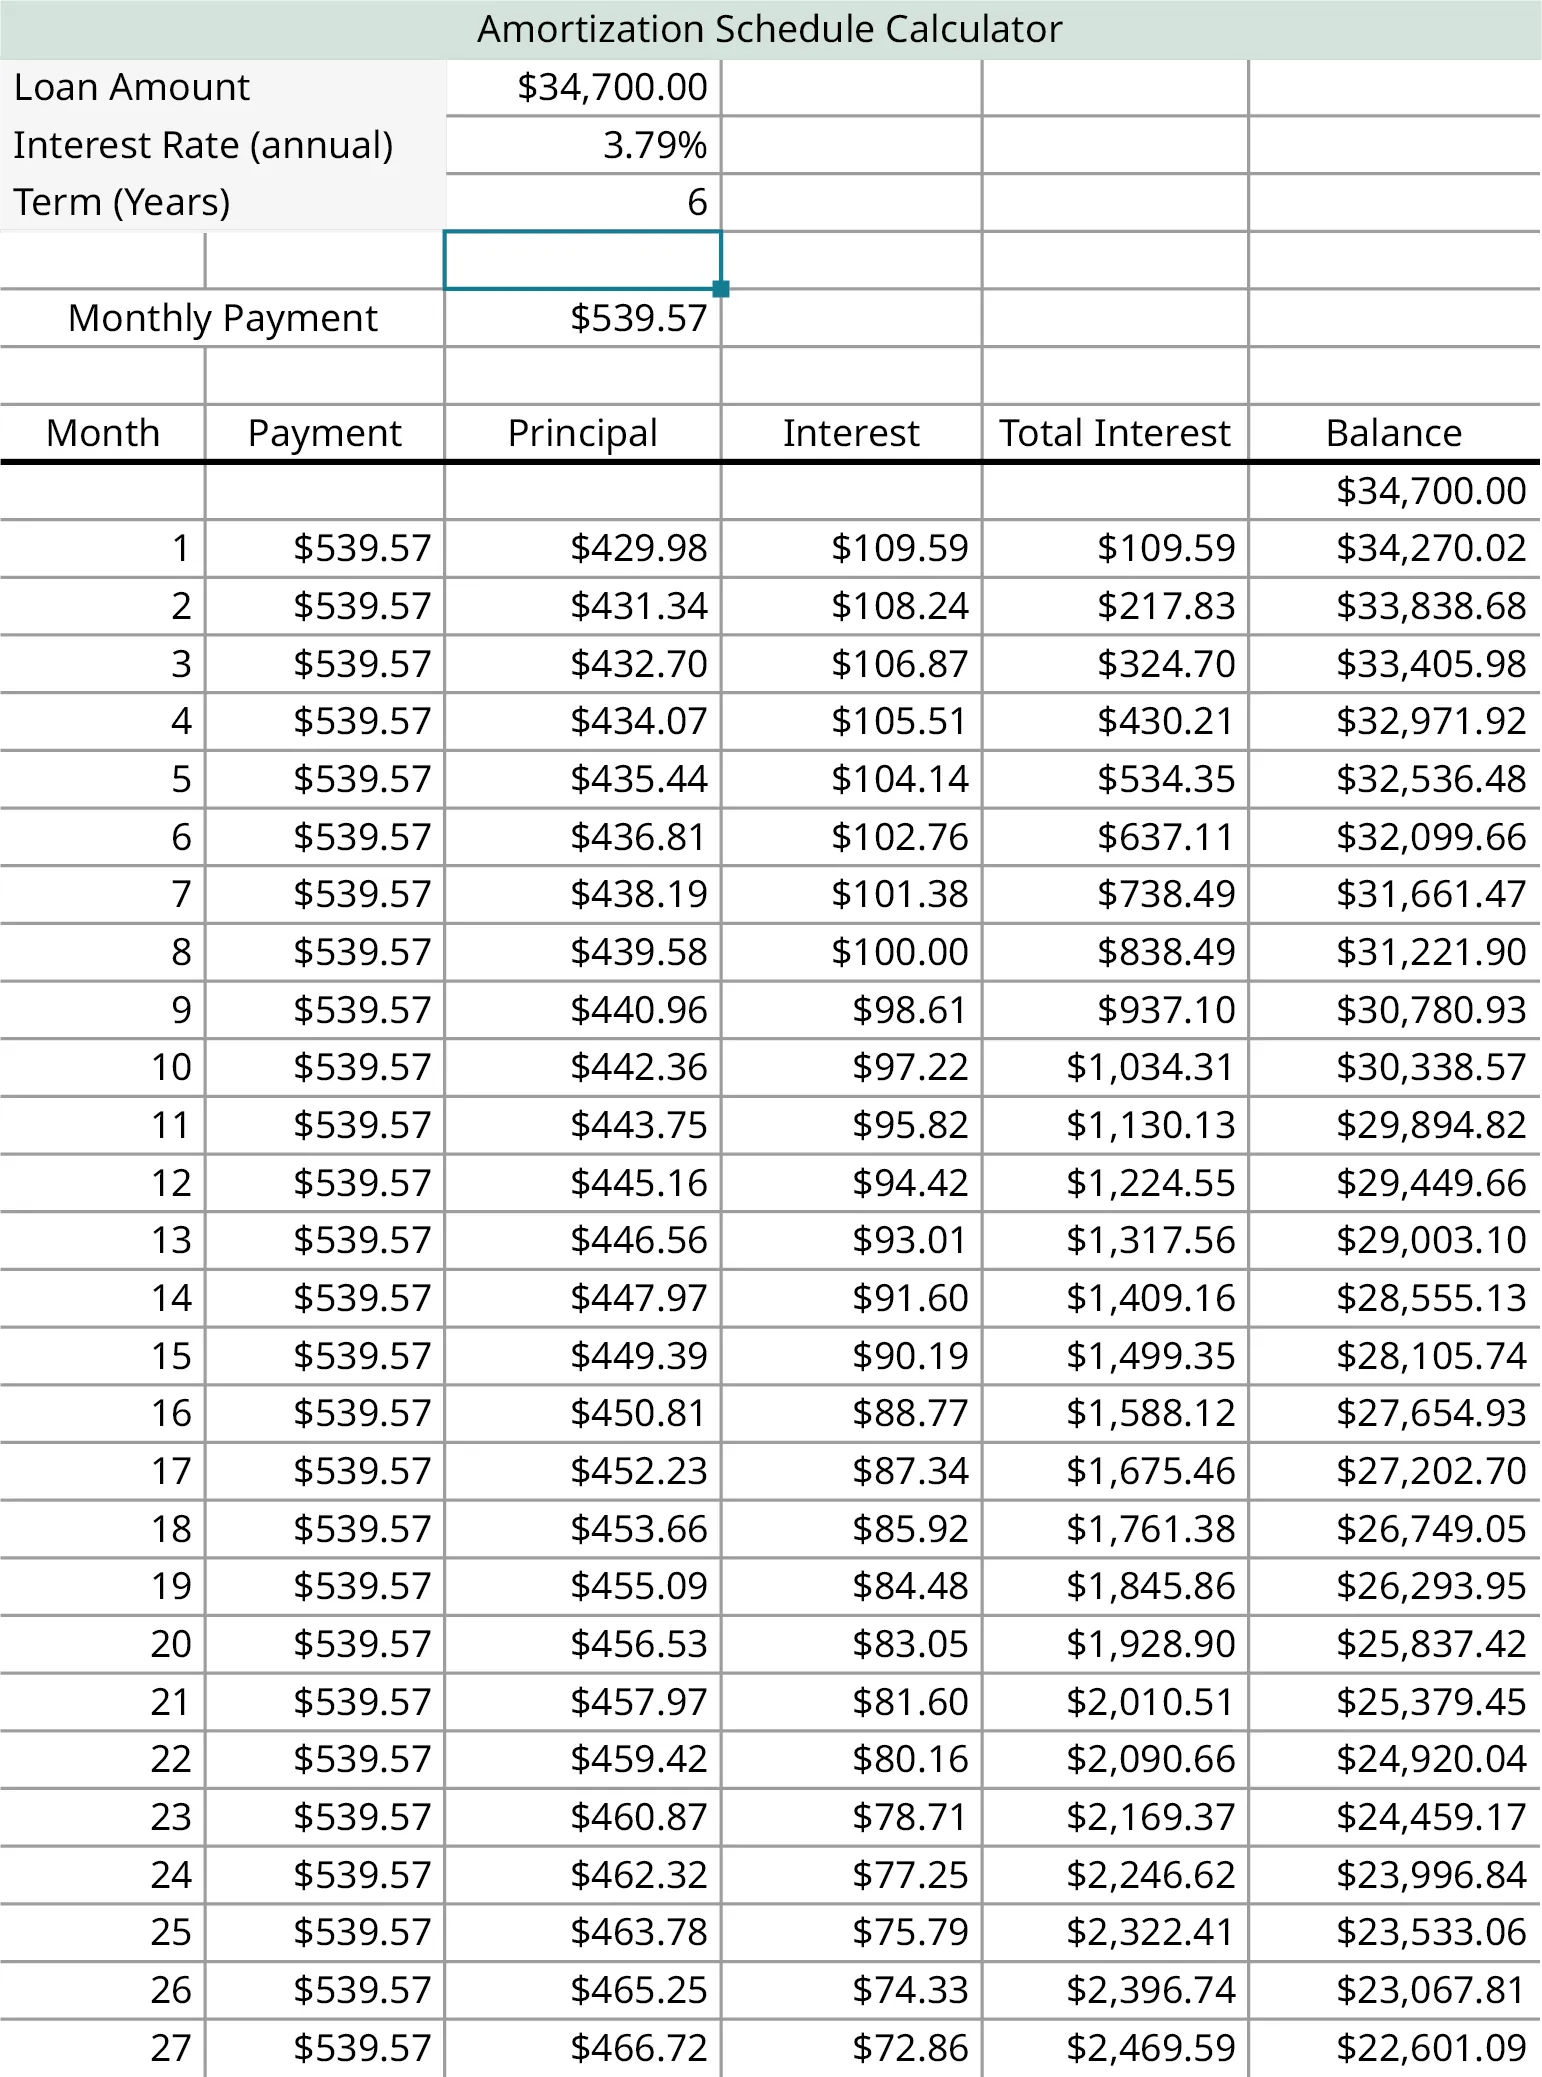 A spreadsheet labeled as amortization schedule calculator. The sheet calculates the repayment for the loan amount of $34,700.00 for the interest rate 3.79 percent annually and the monthly payment is $539.57. The factors include calculations such as month, payment, principal, interest, total and interest and balance.